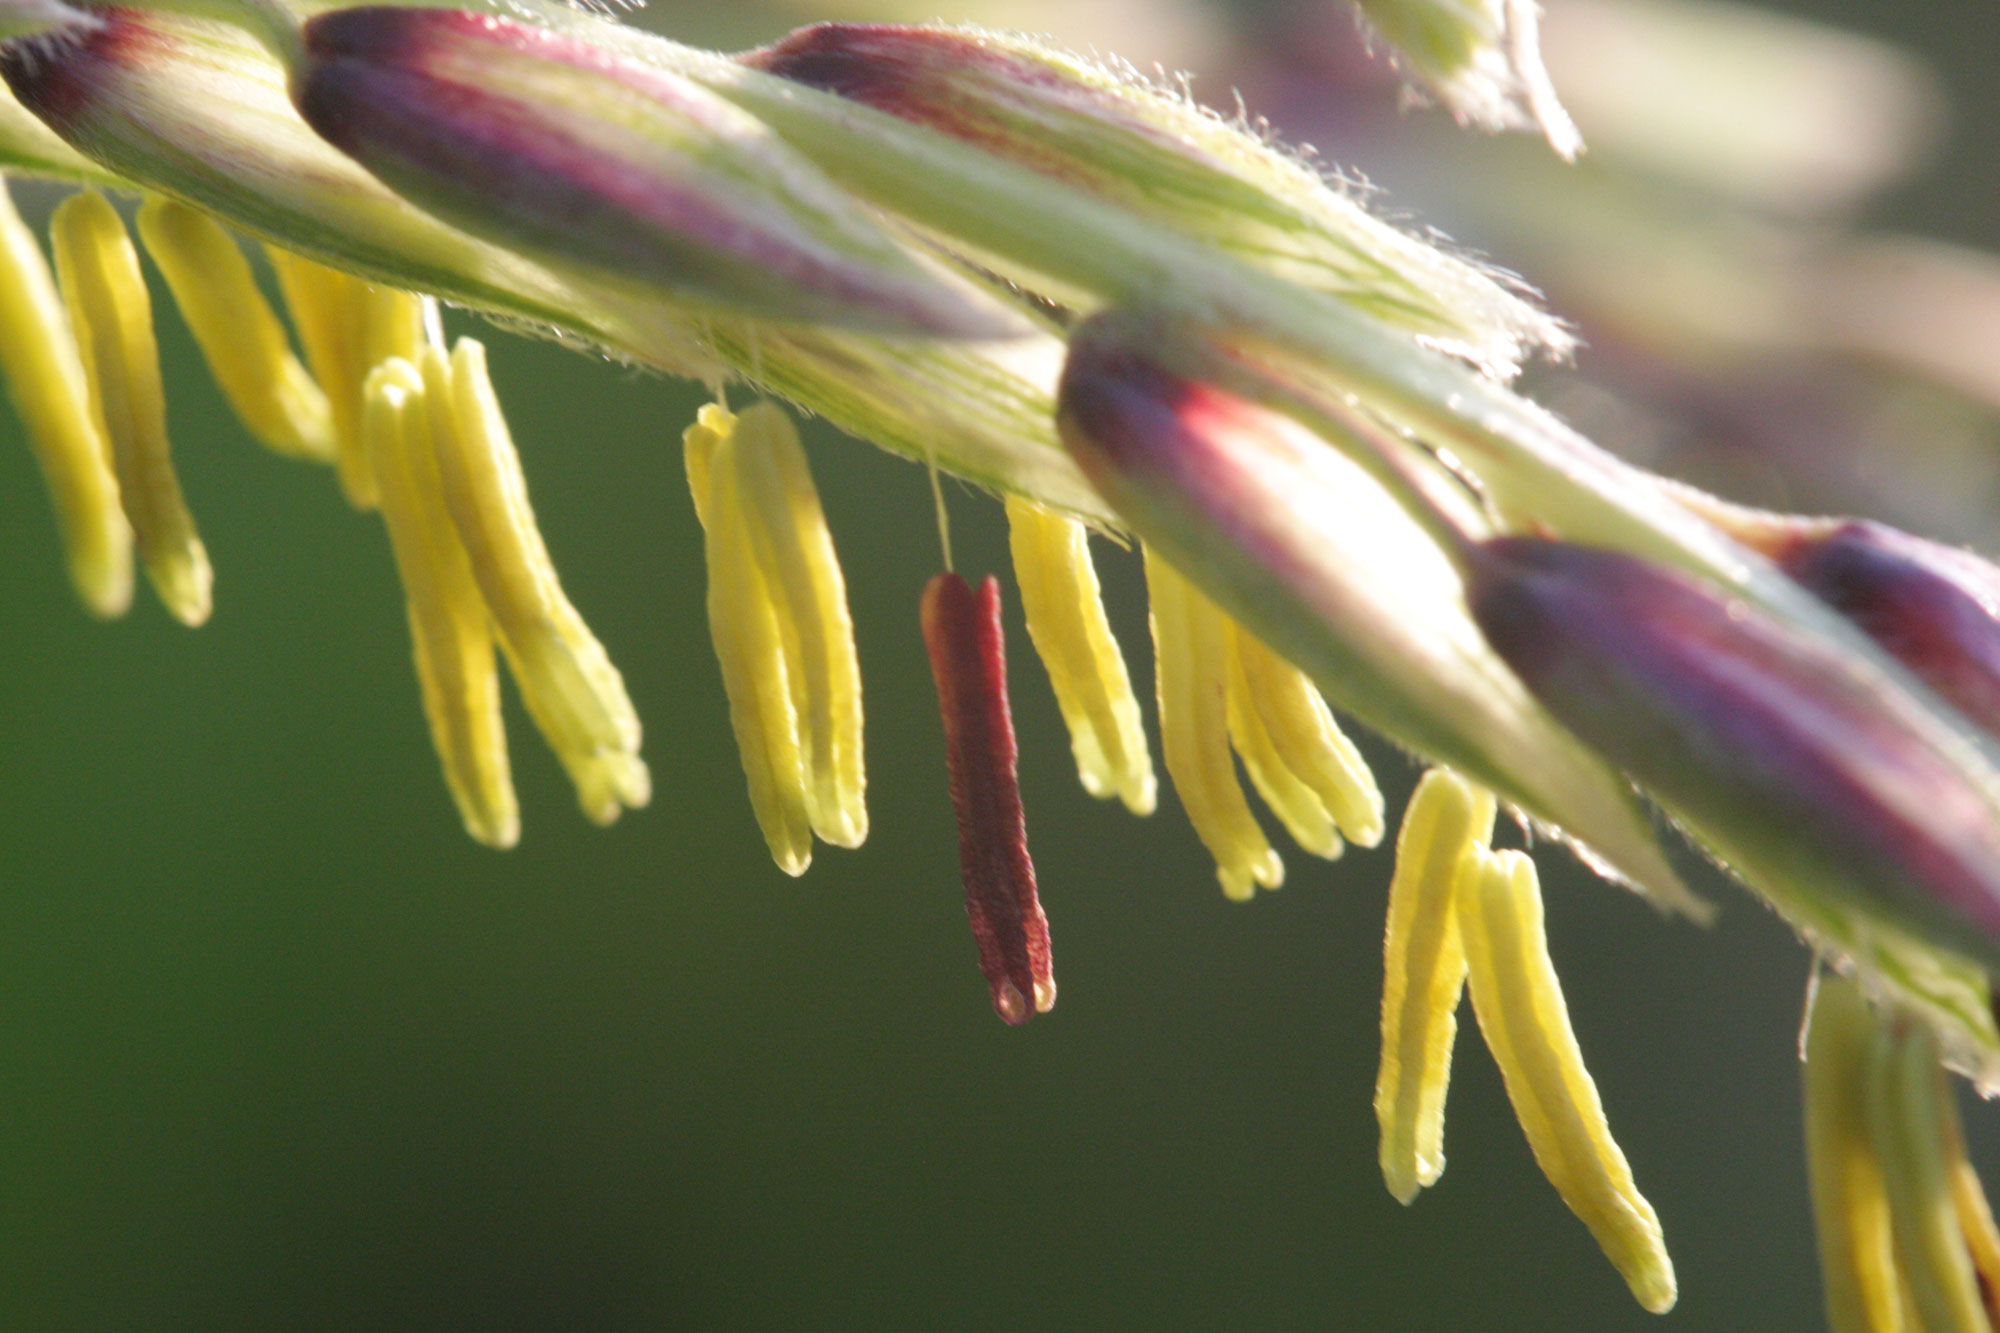 Photograph showing a close-up of male maize florets with yellow anthers dangling from them. One of the florets is reddish in color, indicating that it has probably released its pollen.